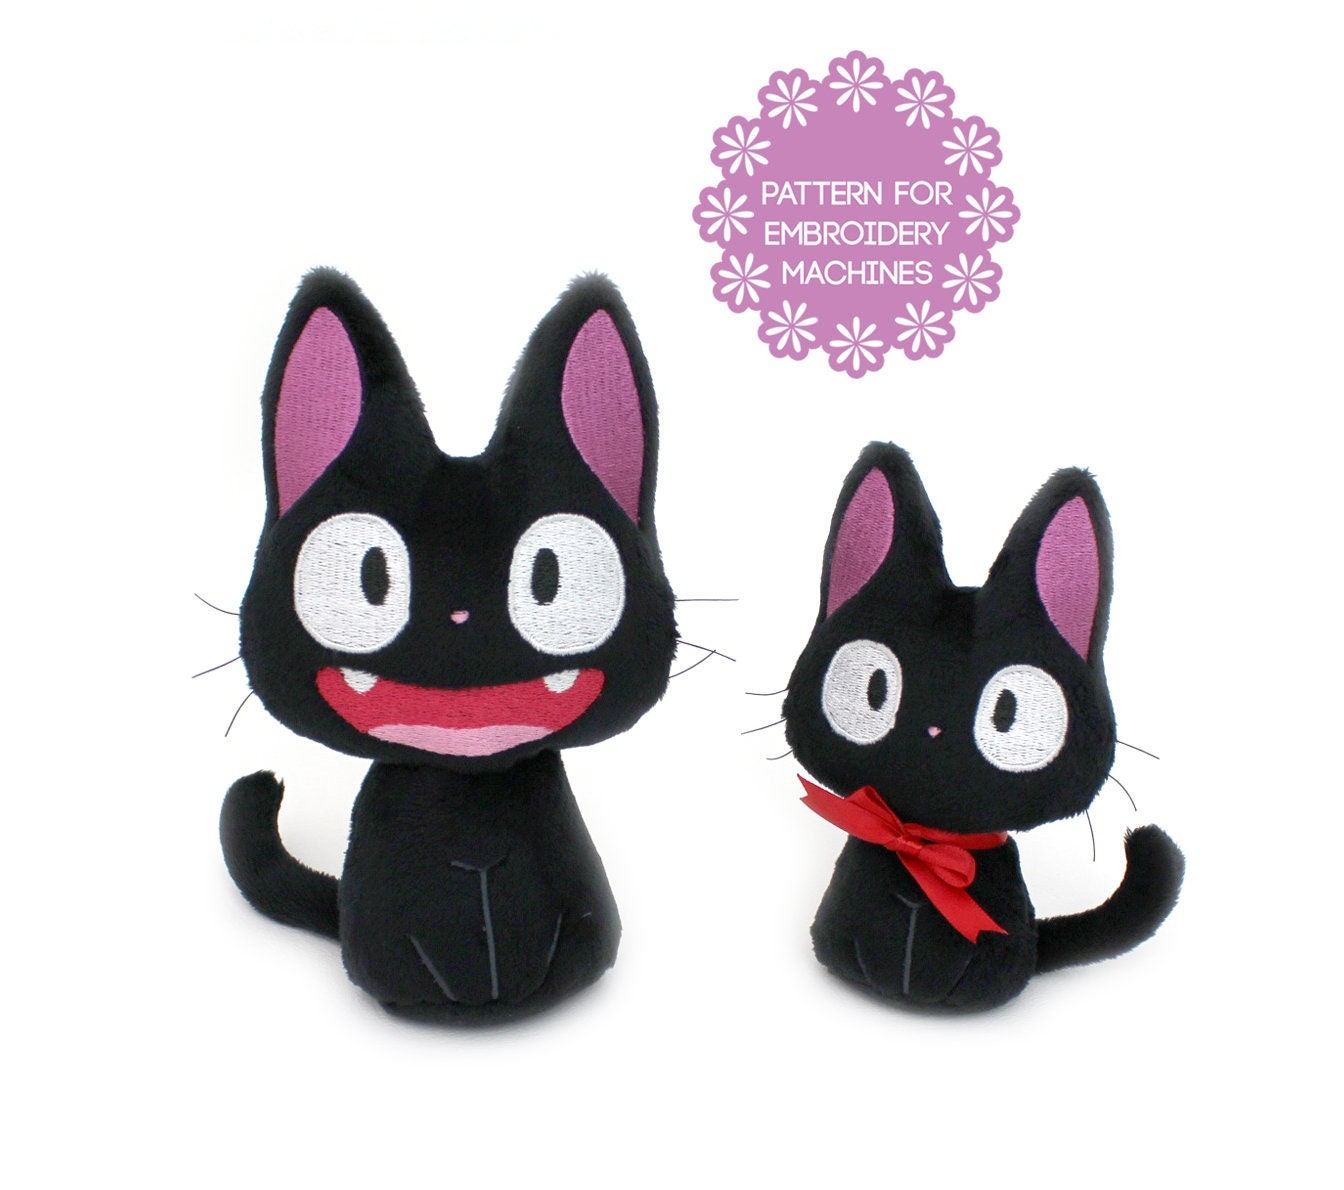 Source Wholesale Action Figure anime dancing cat models trendy toys  capsule toys raising hands enchanting cat ornaments on malibabacom